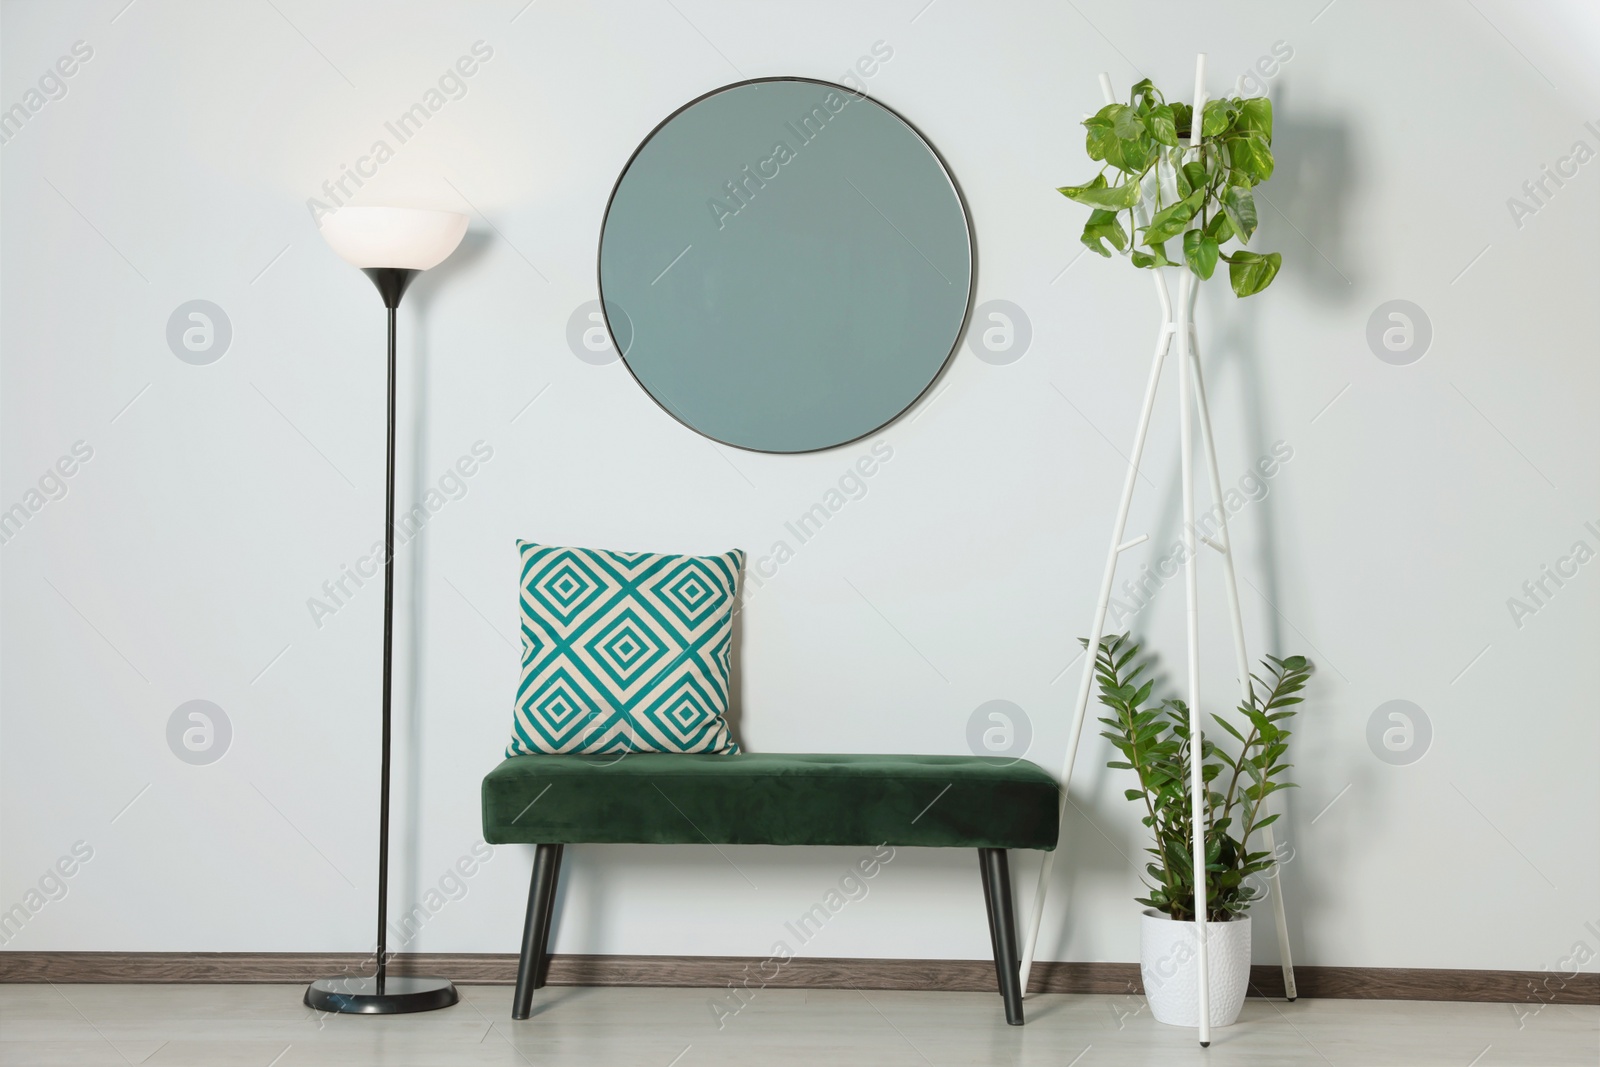 Photo of Stylish round mirror on white wall over bench in room